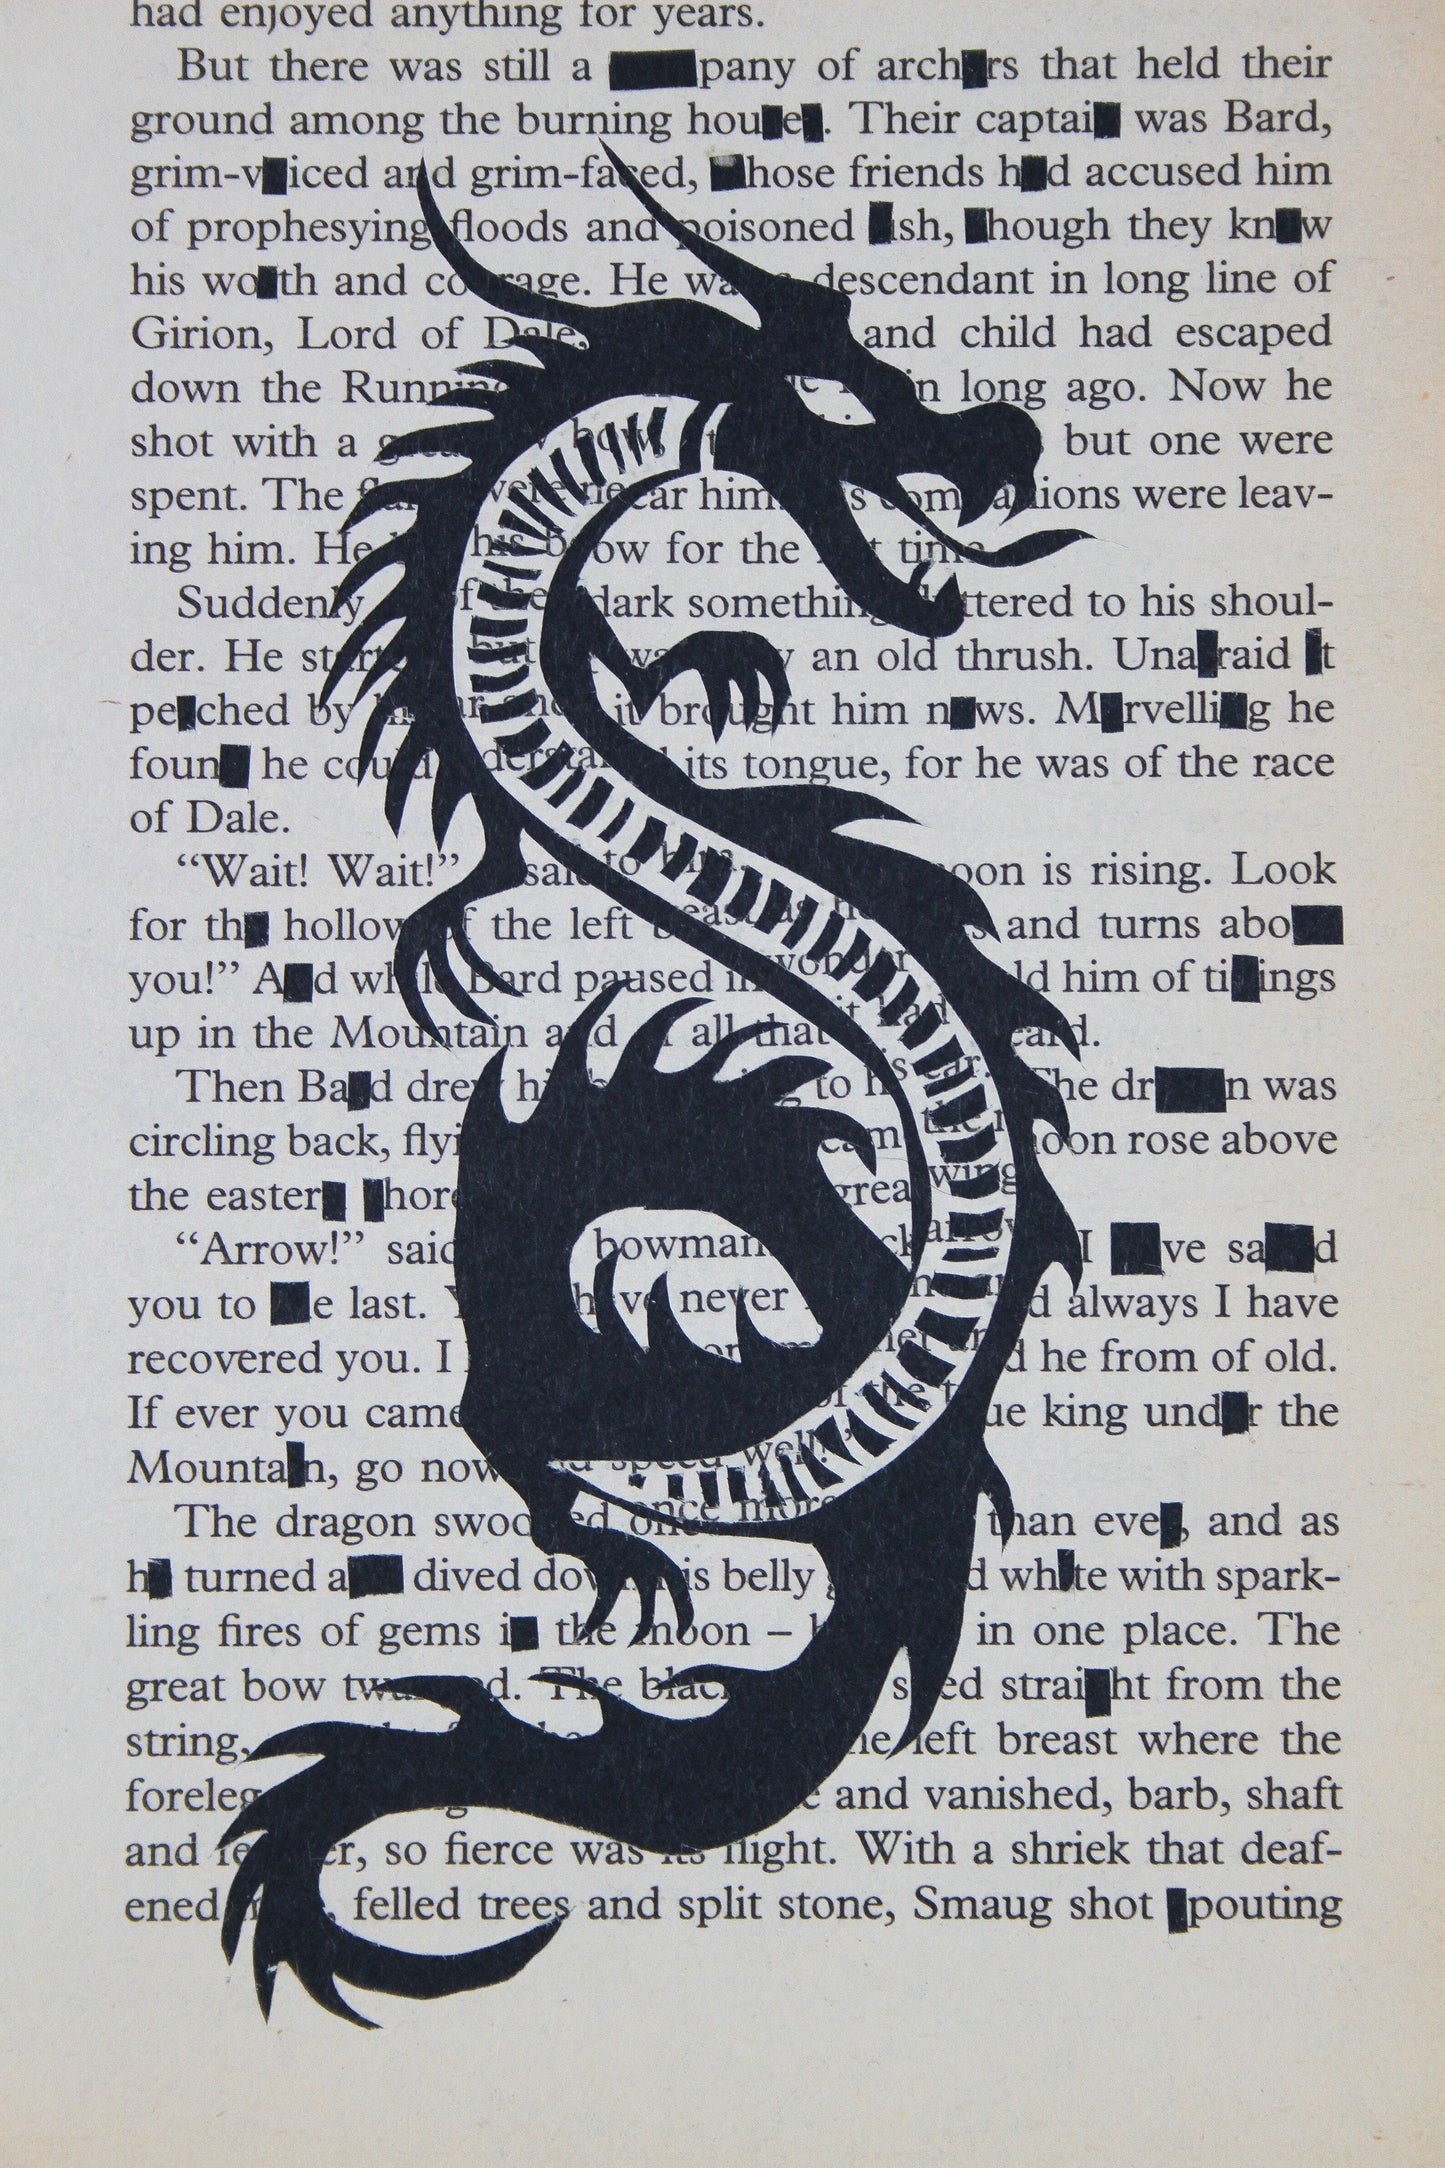 The Hobbit "Snow after Fire with Dragon 231" | Single Paper Cut | Limited Edition 1 of 1 - James Voce // artist